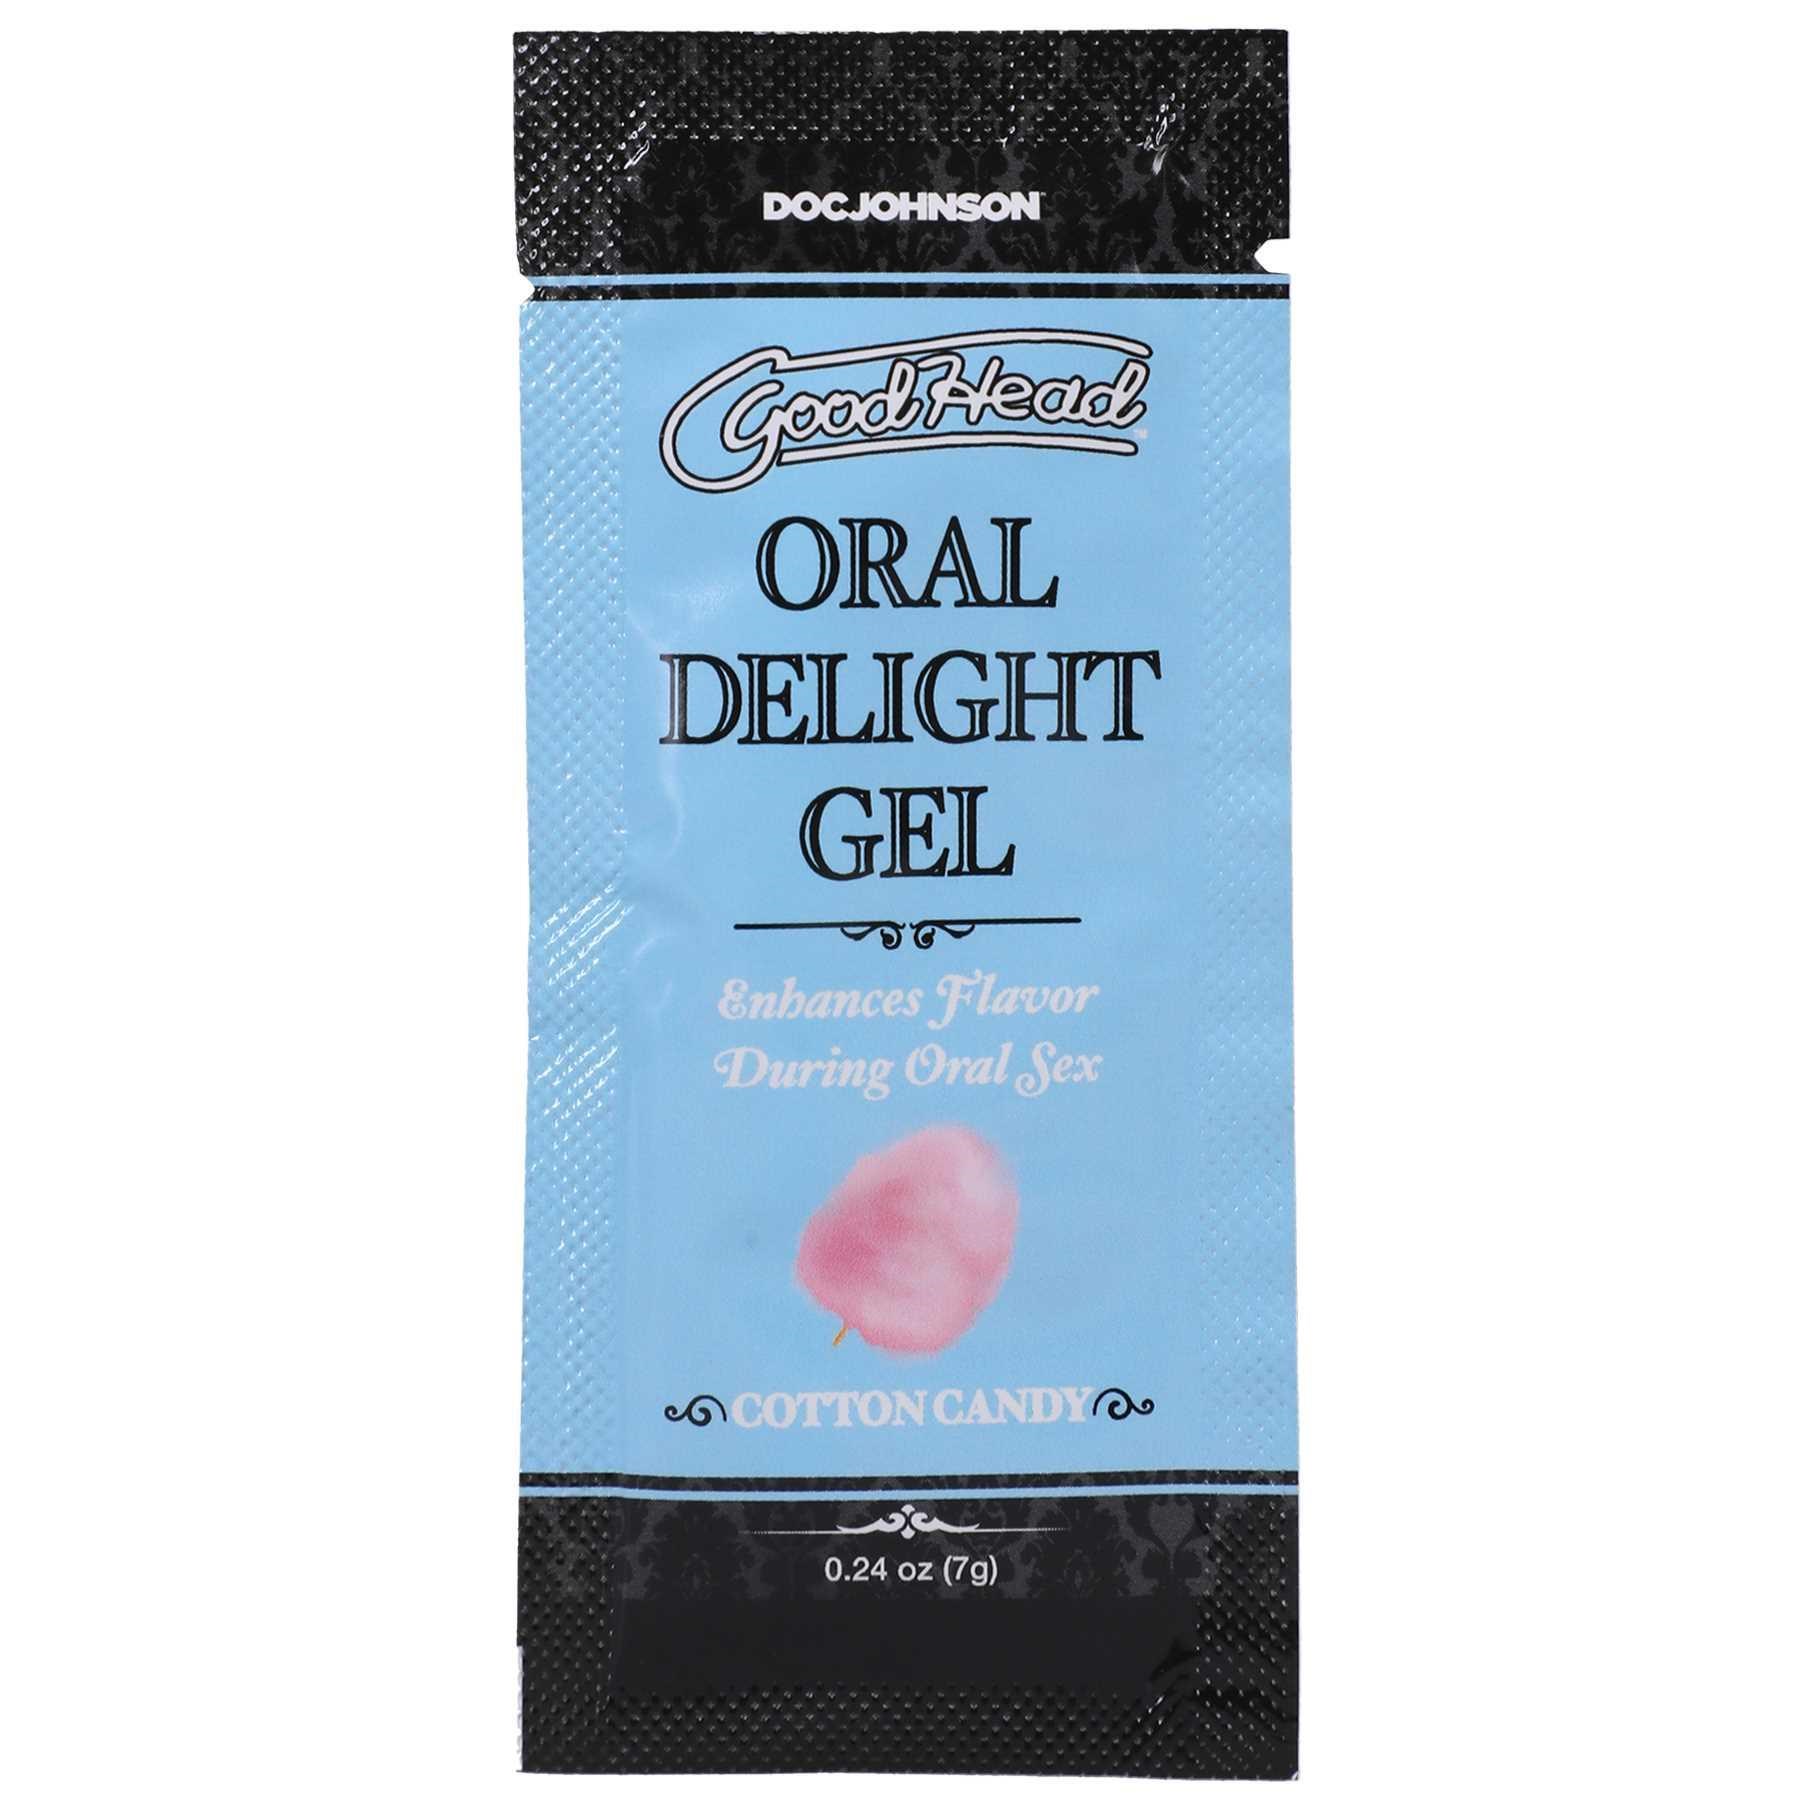 GoodHead - Oral Delight Gel -cotton candy -0.24 oz front